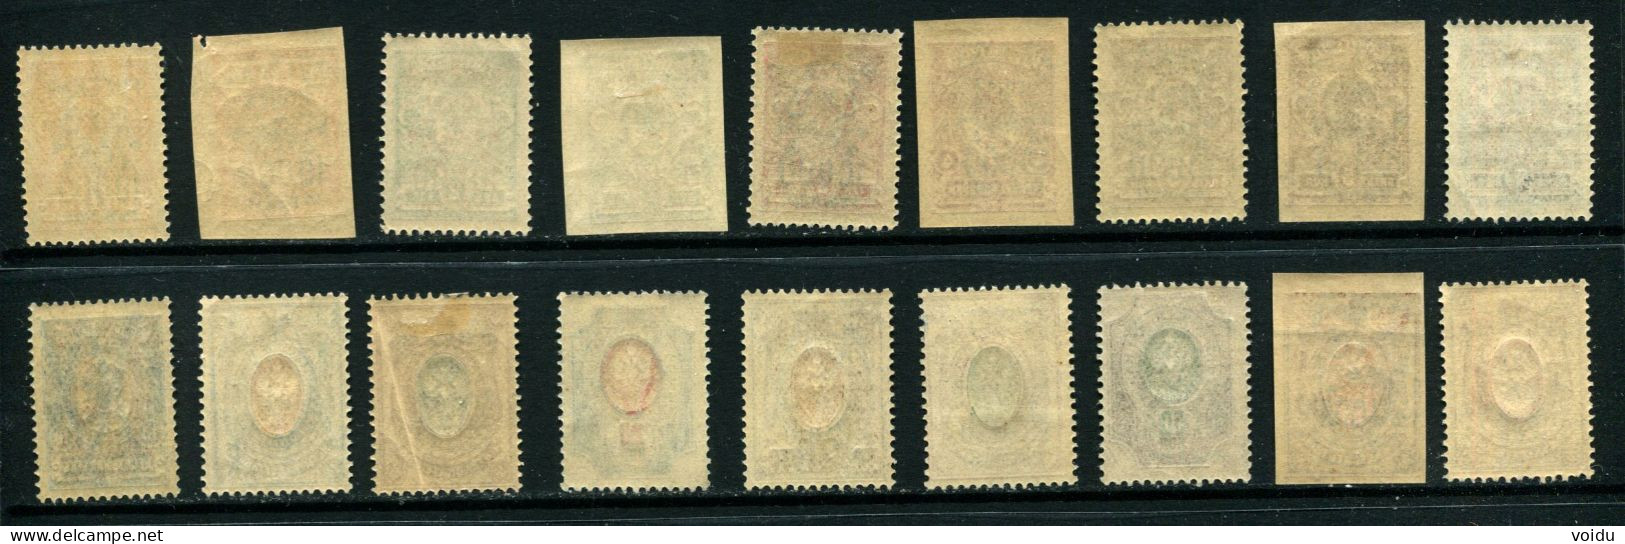 Russia 1920 Wrangel Army.   MLH*, Missing 2 Perforate And 2 Imperforate - Wrangel Army